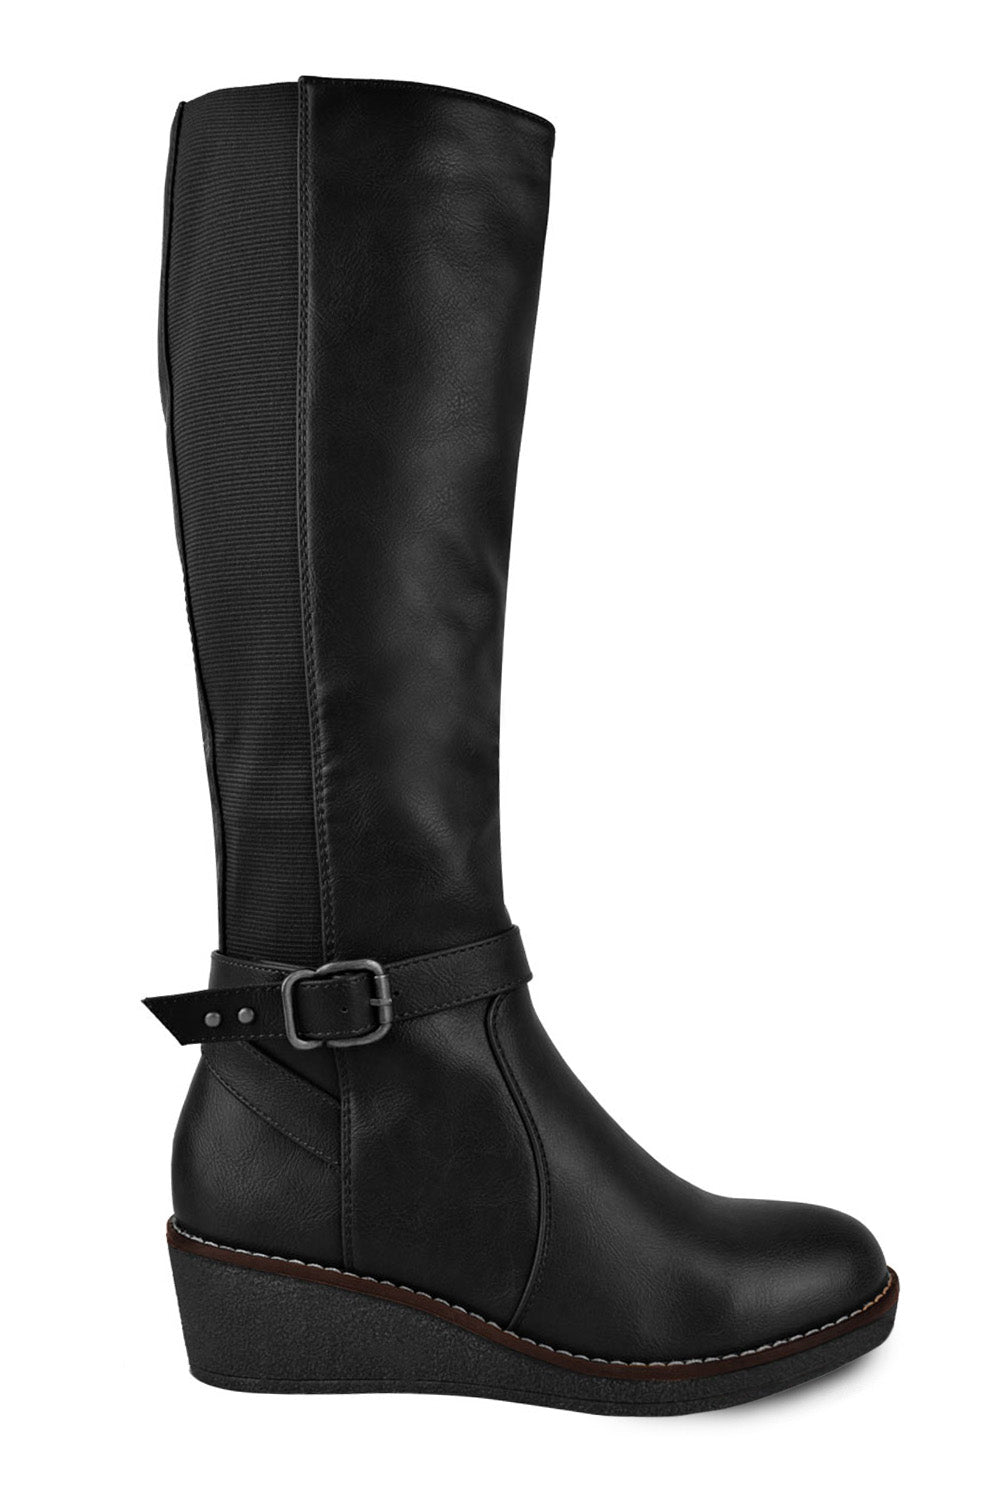 AYLEEN WEDGE HEEL KNEE HIGH BOOTS WITH ELASTIC PANEL IN BLACK FAUX LEATHER